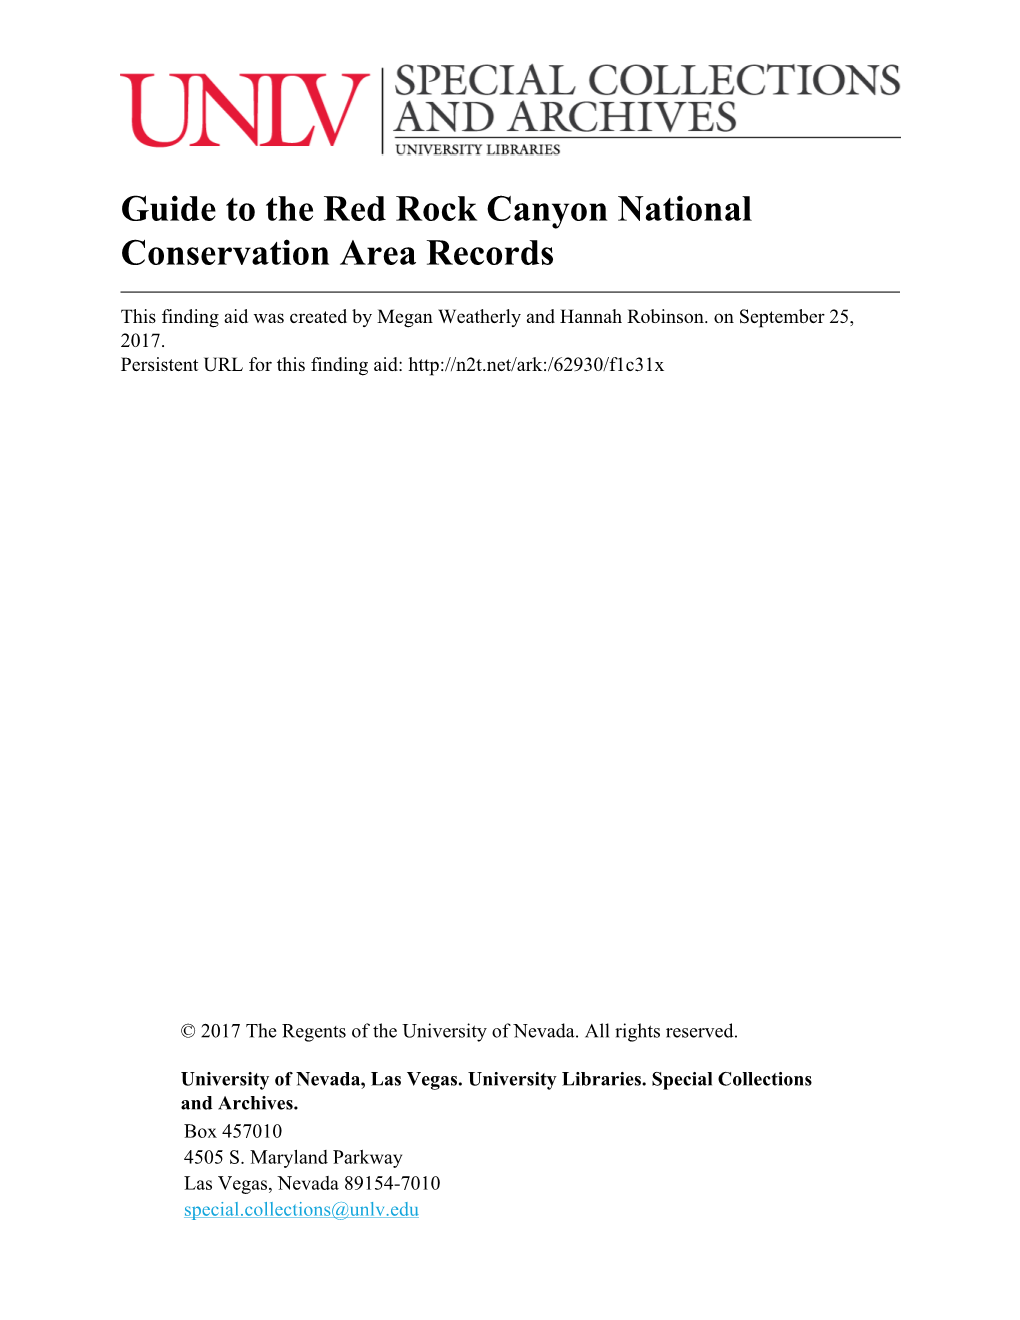 Guide to the Red Rock Canyon National Conservation Area Records